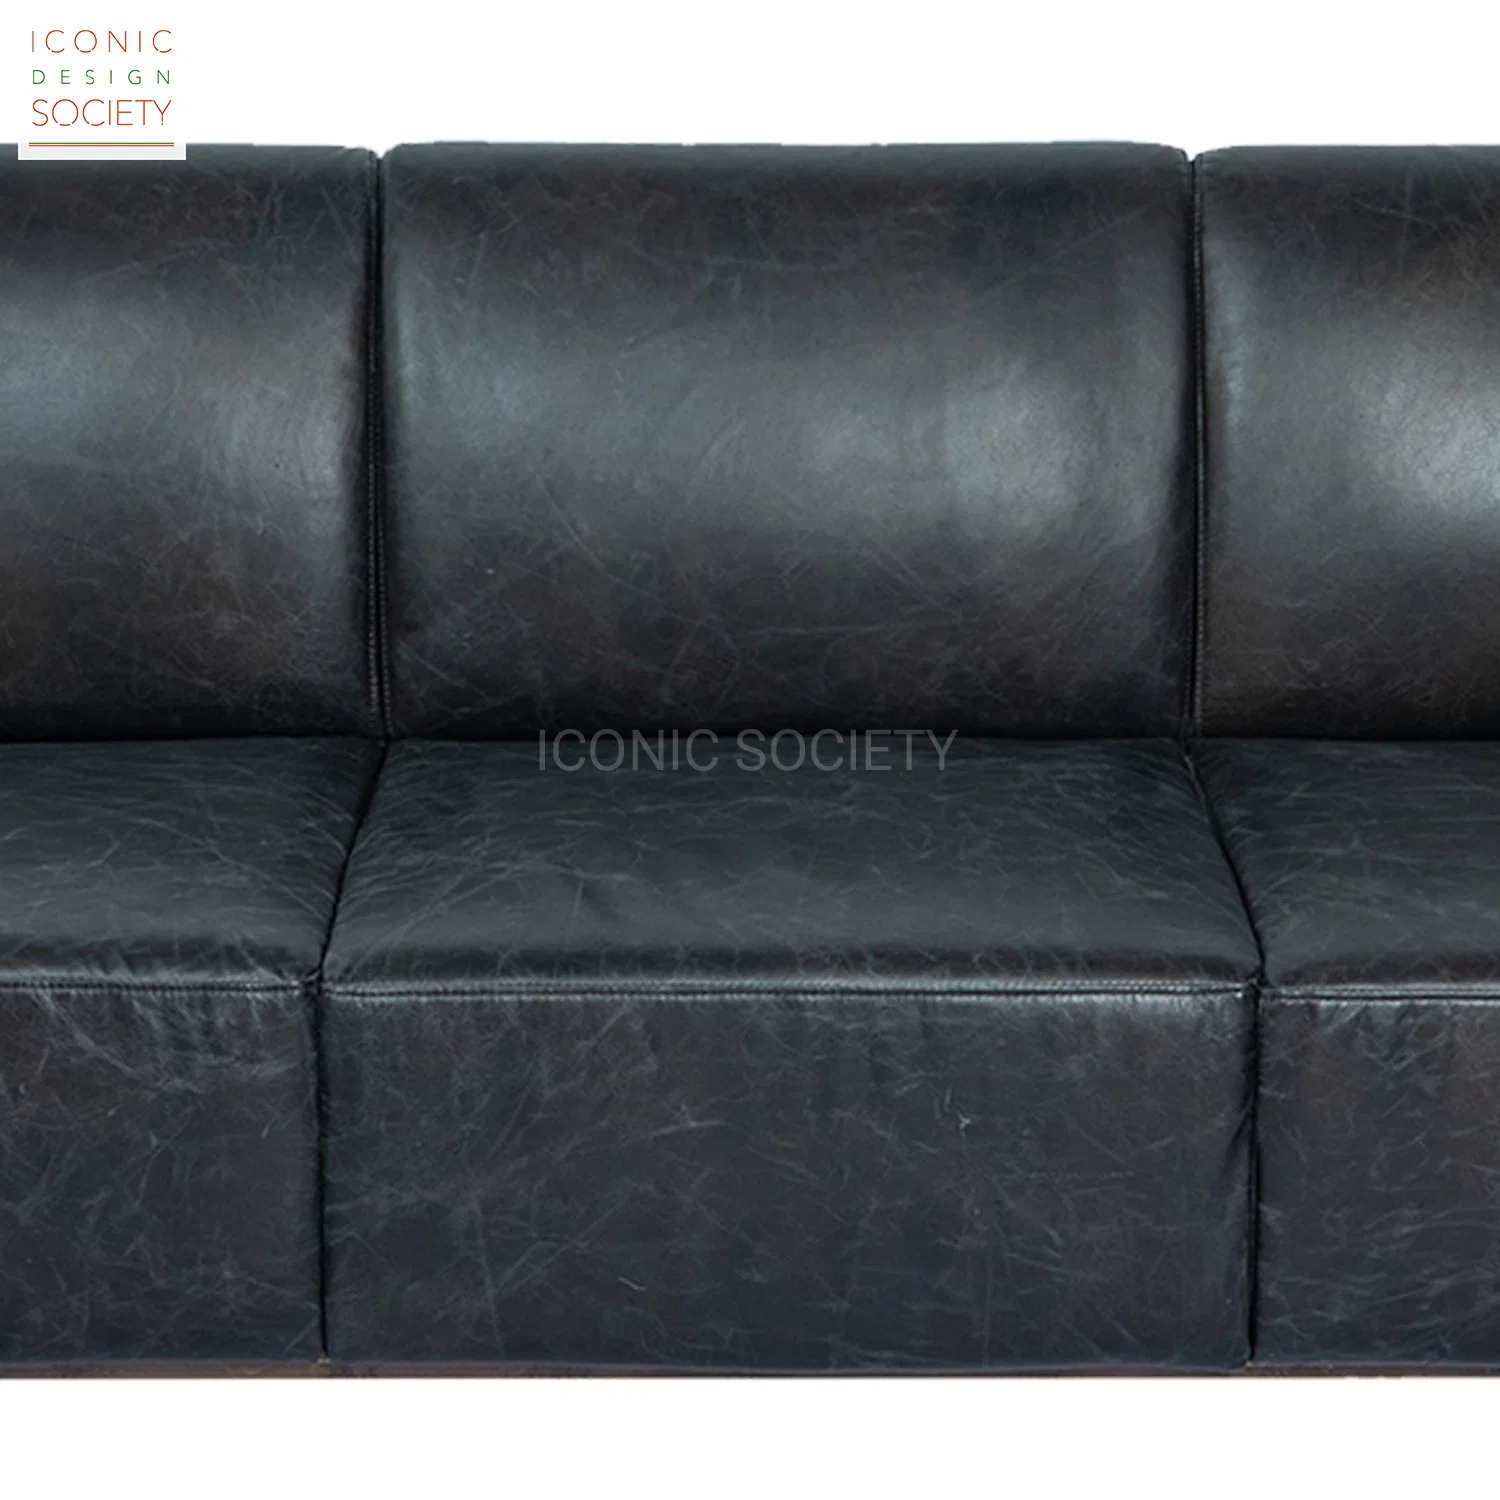 Living Room Furniture Hotel Frame Iron Frame Leisure Couch Sets Velvet Fabric Genuine Leather Sofa Set Home Furniture